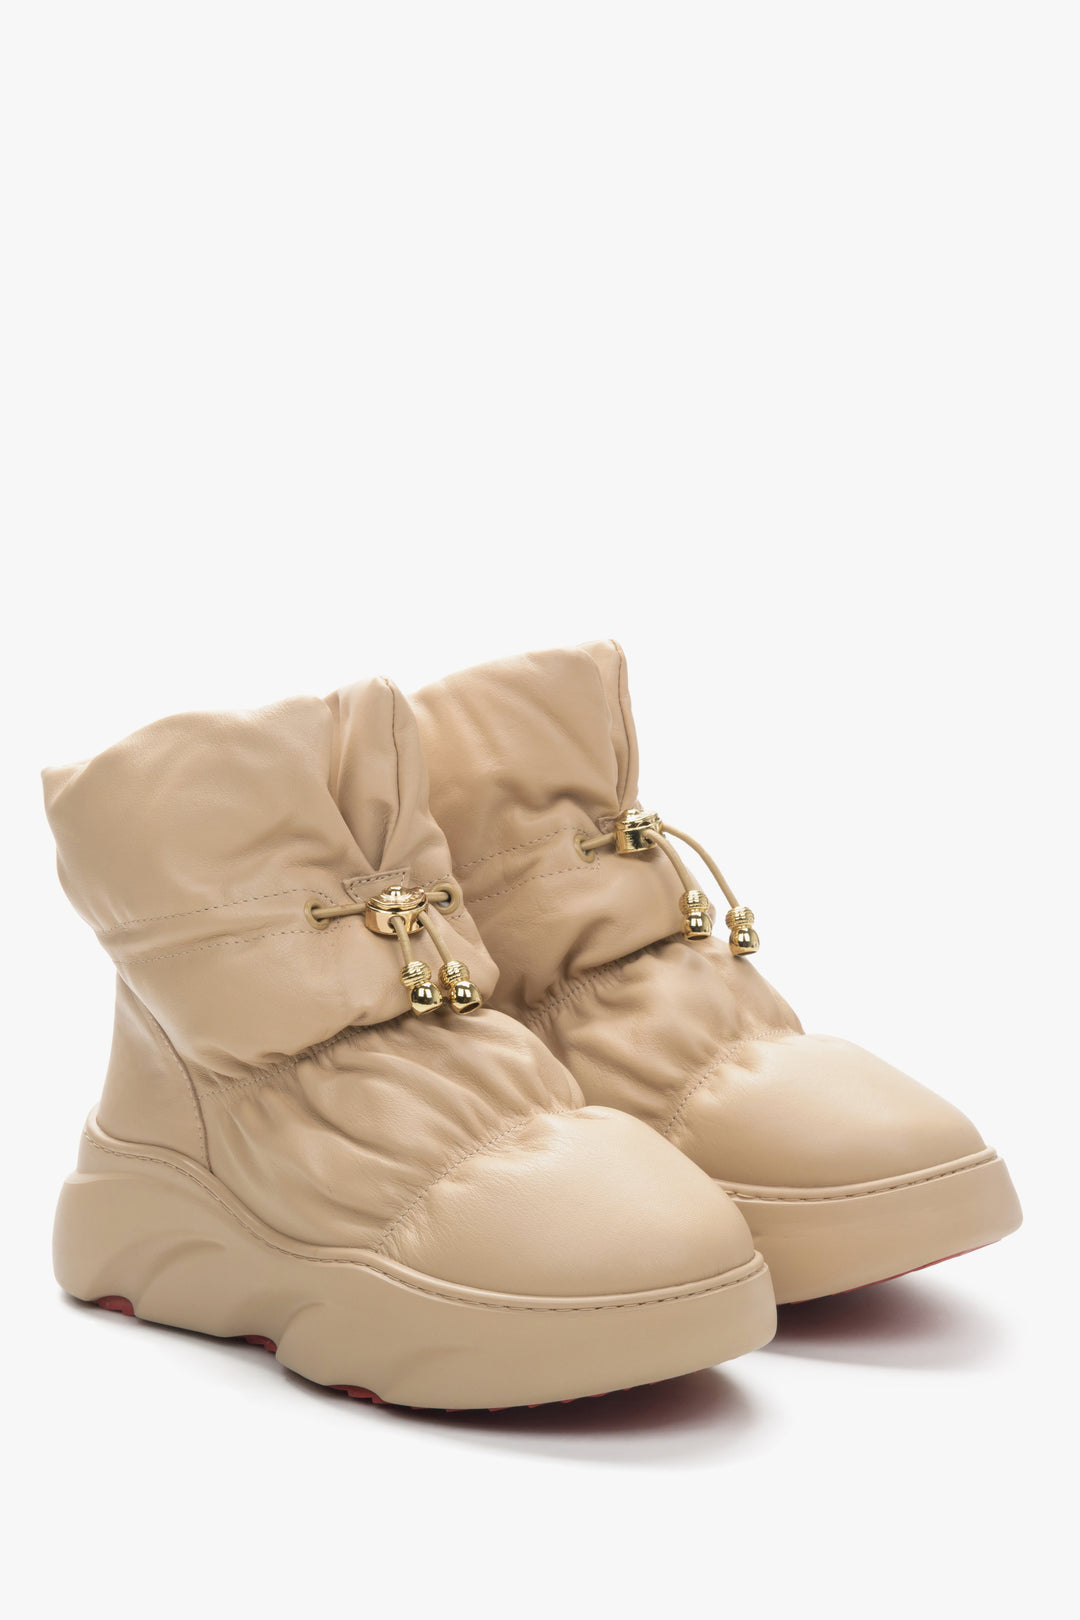 Insulated women's snow boots in beige color by Estro.